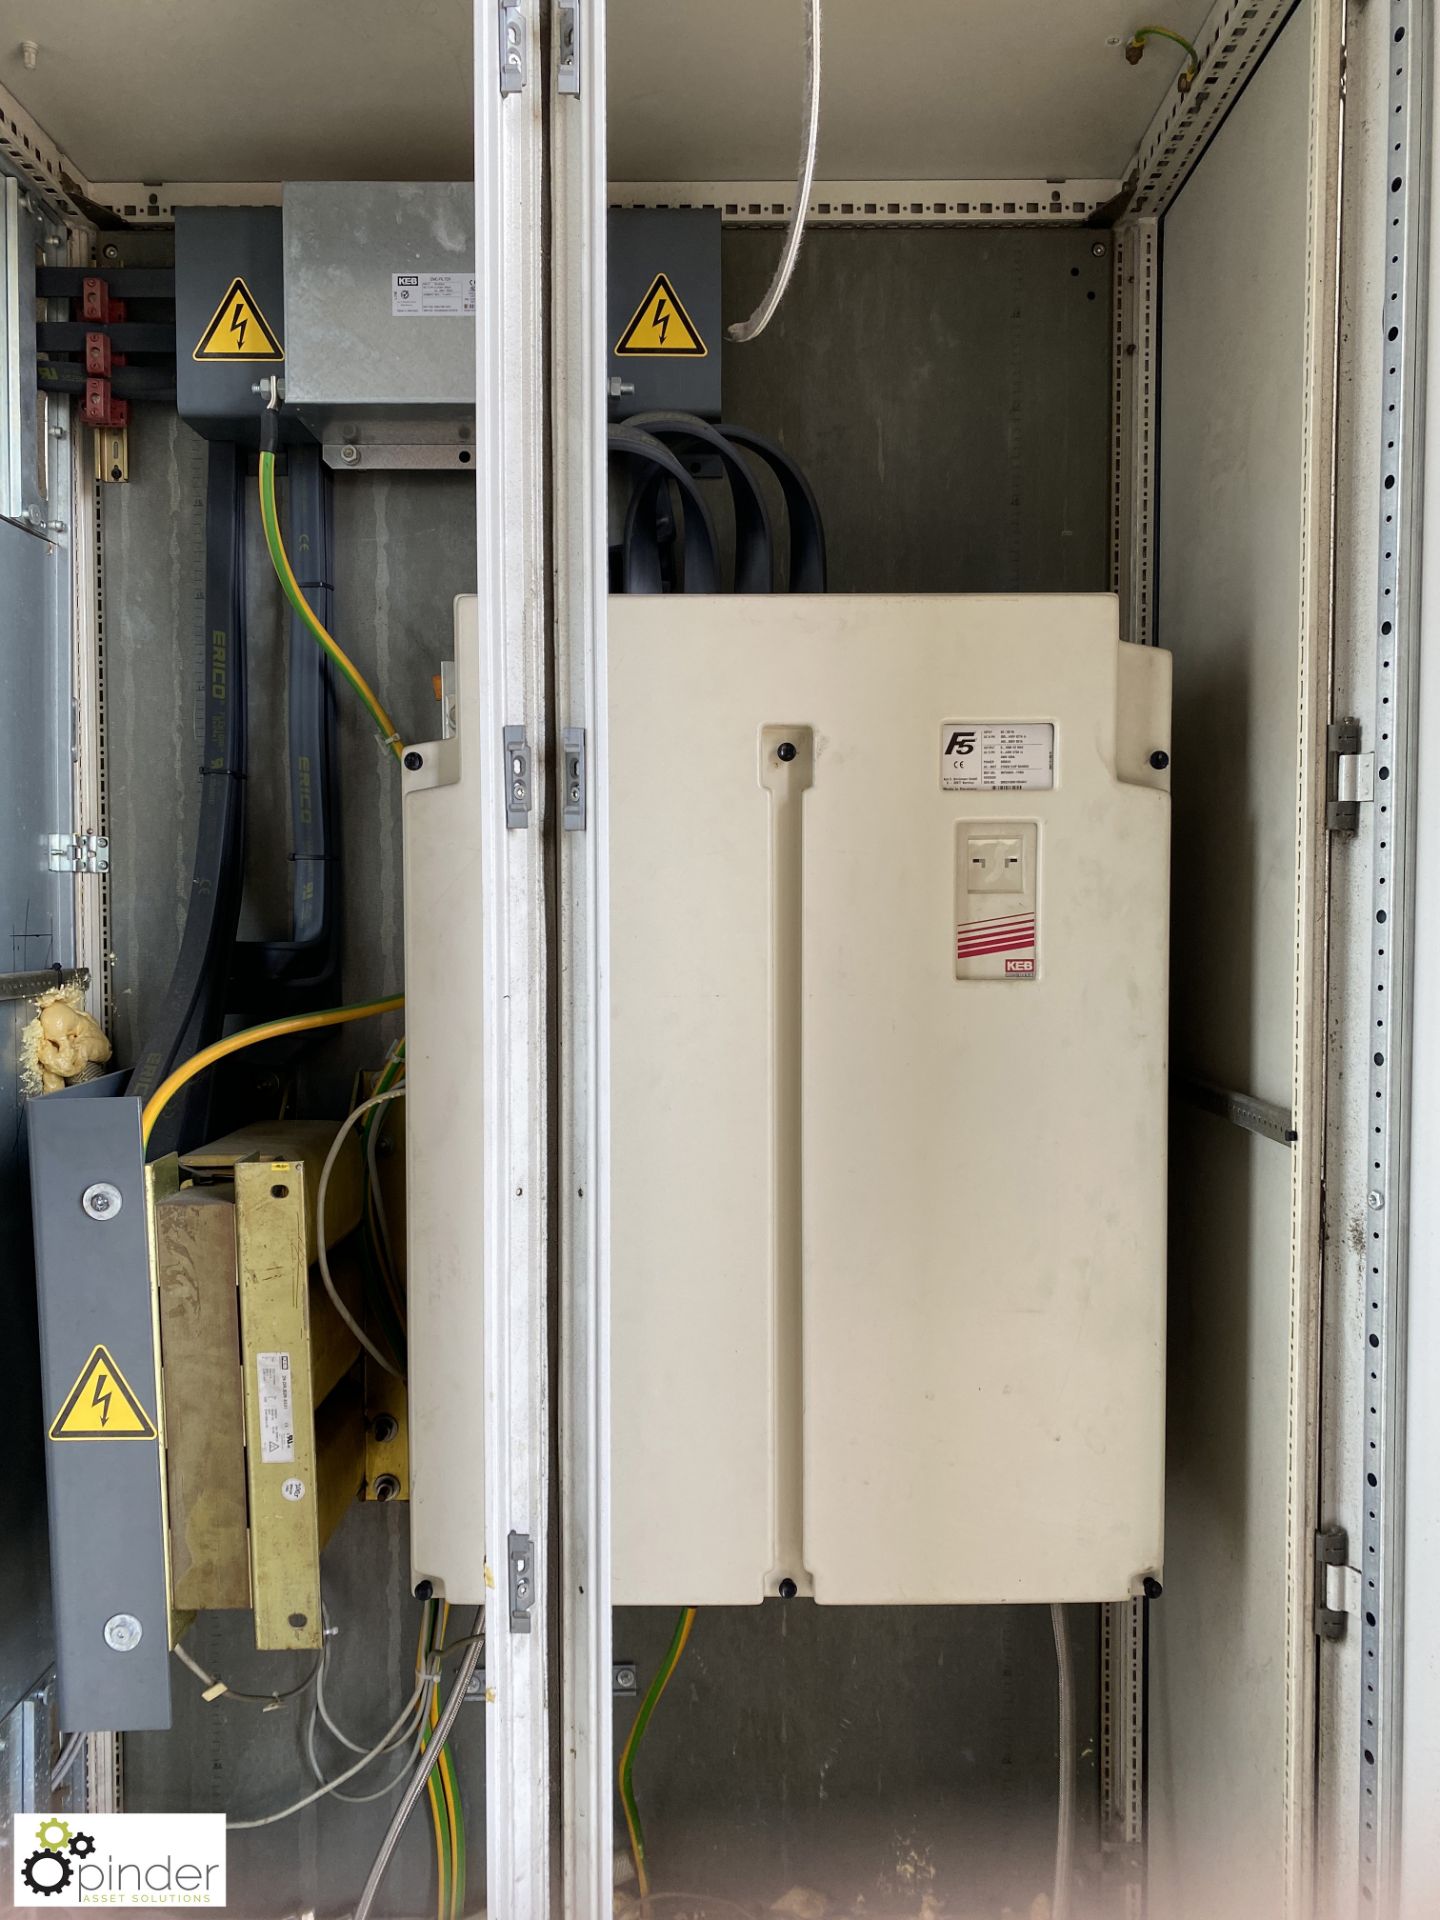 KEB Combivert Inverter Drive Panel, type 30F5ABW-WVBG, 415volts, 315kw (Location Carlisle Site 1) - Image 5 of 10